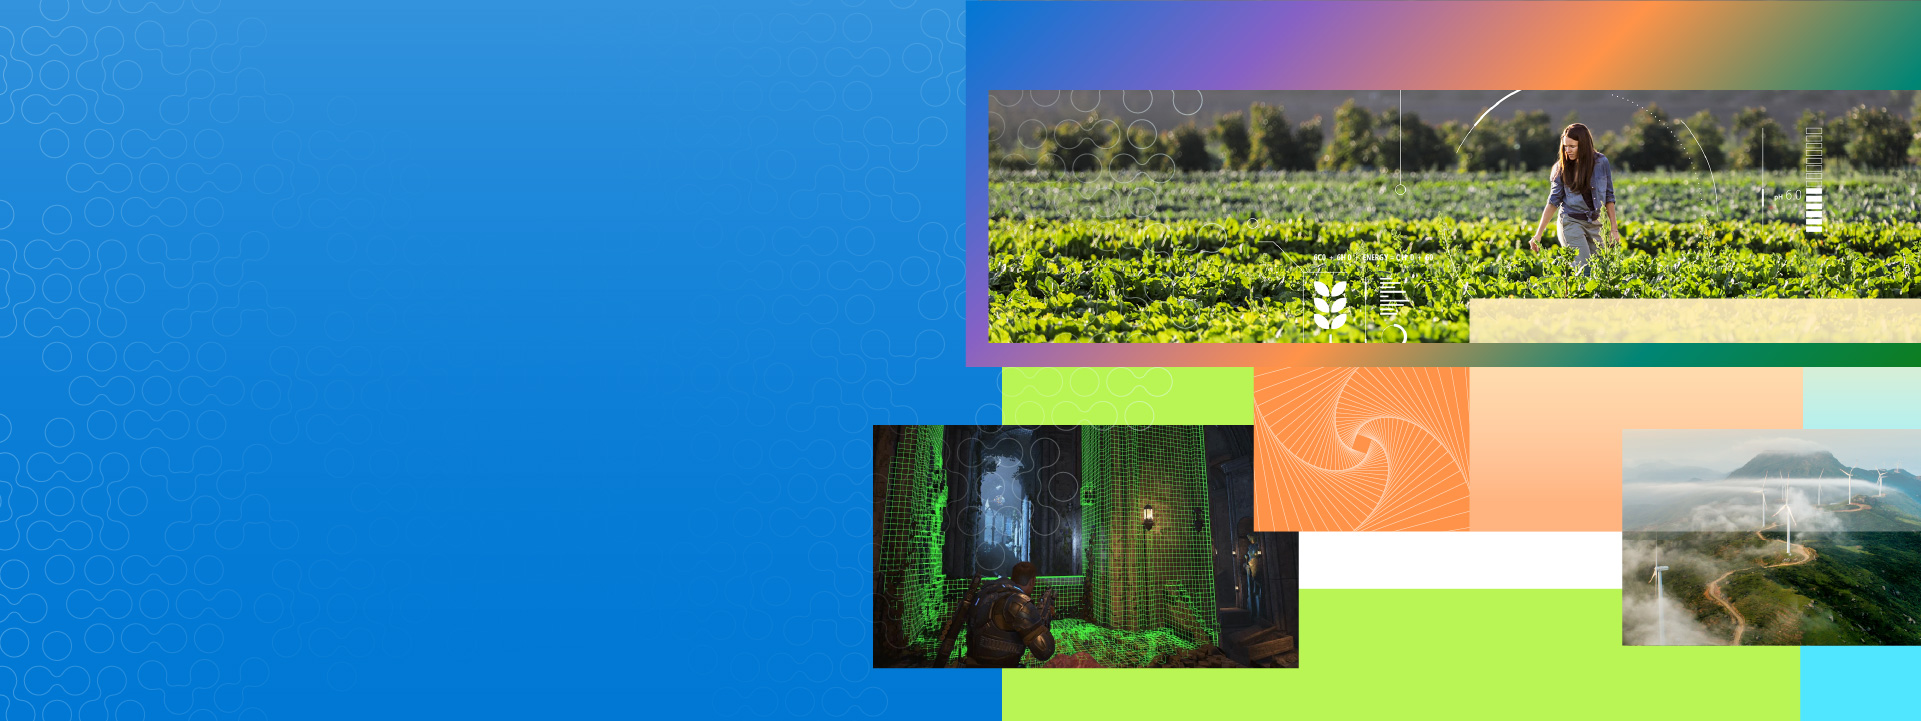 Research for Industry header: agri-food, energy, gaming image collage